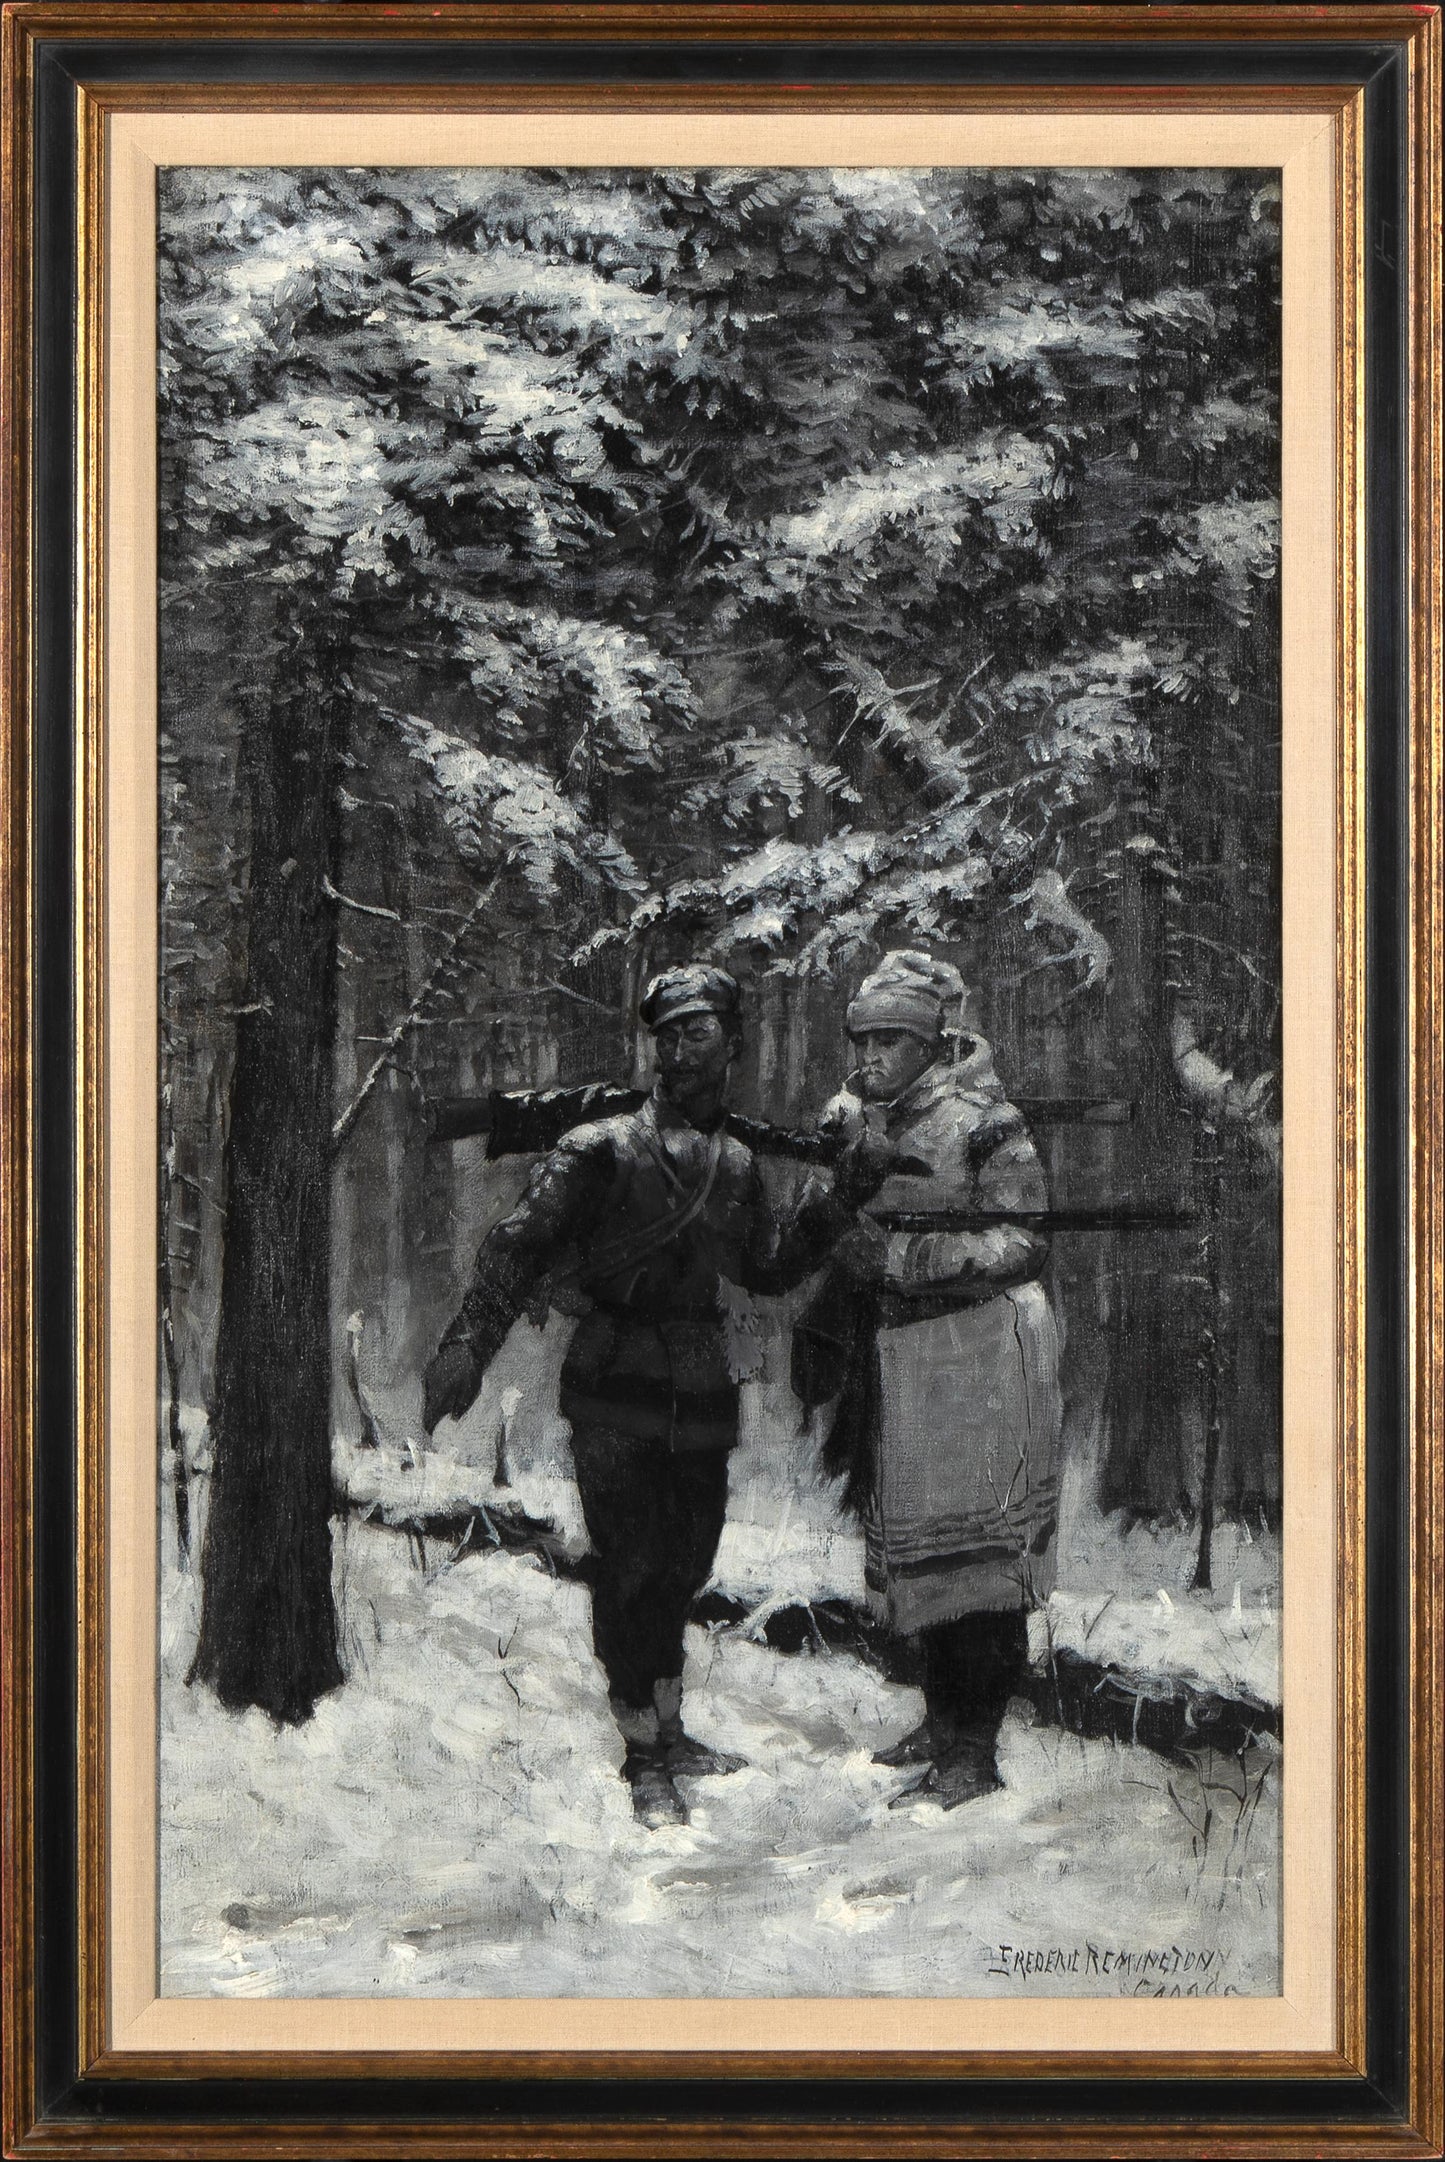 Frederic Remington - The Track in the Winter Forest 30.875" x 19.5"